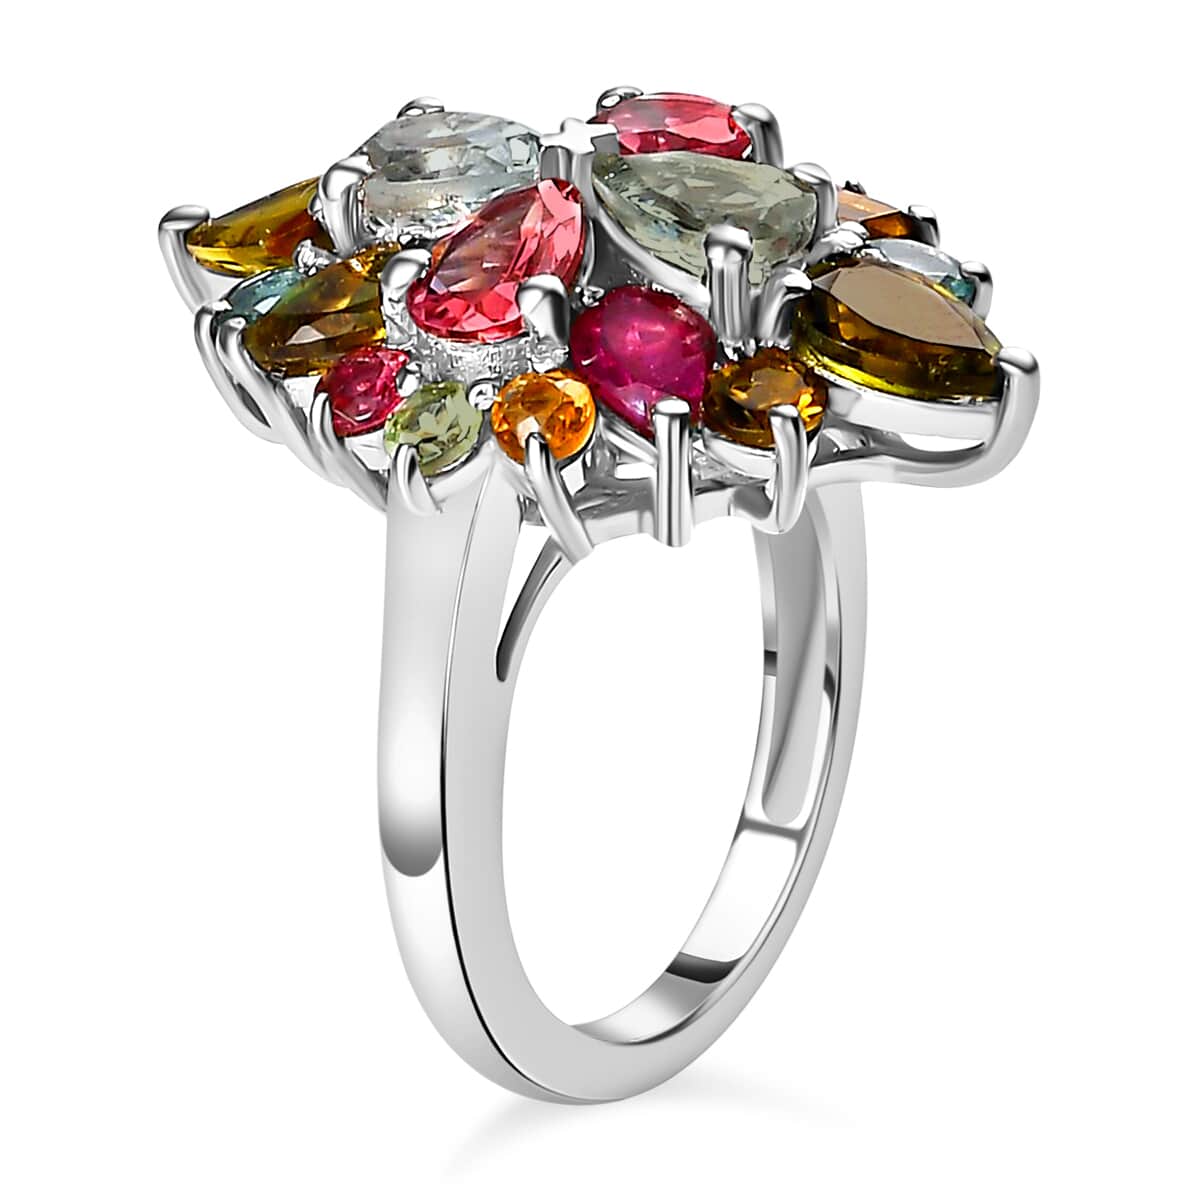 Multi-Tourmaline Elongated Ring, Multi Tourmaline Ring, Colorful Floral Ring, Elongated Floral Ring, Platinum Over Sterling Silver Ring 3.90 ctw (Size 5.0) image number 3